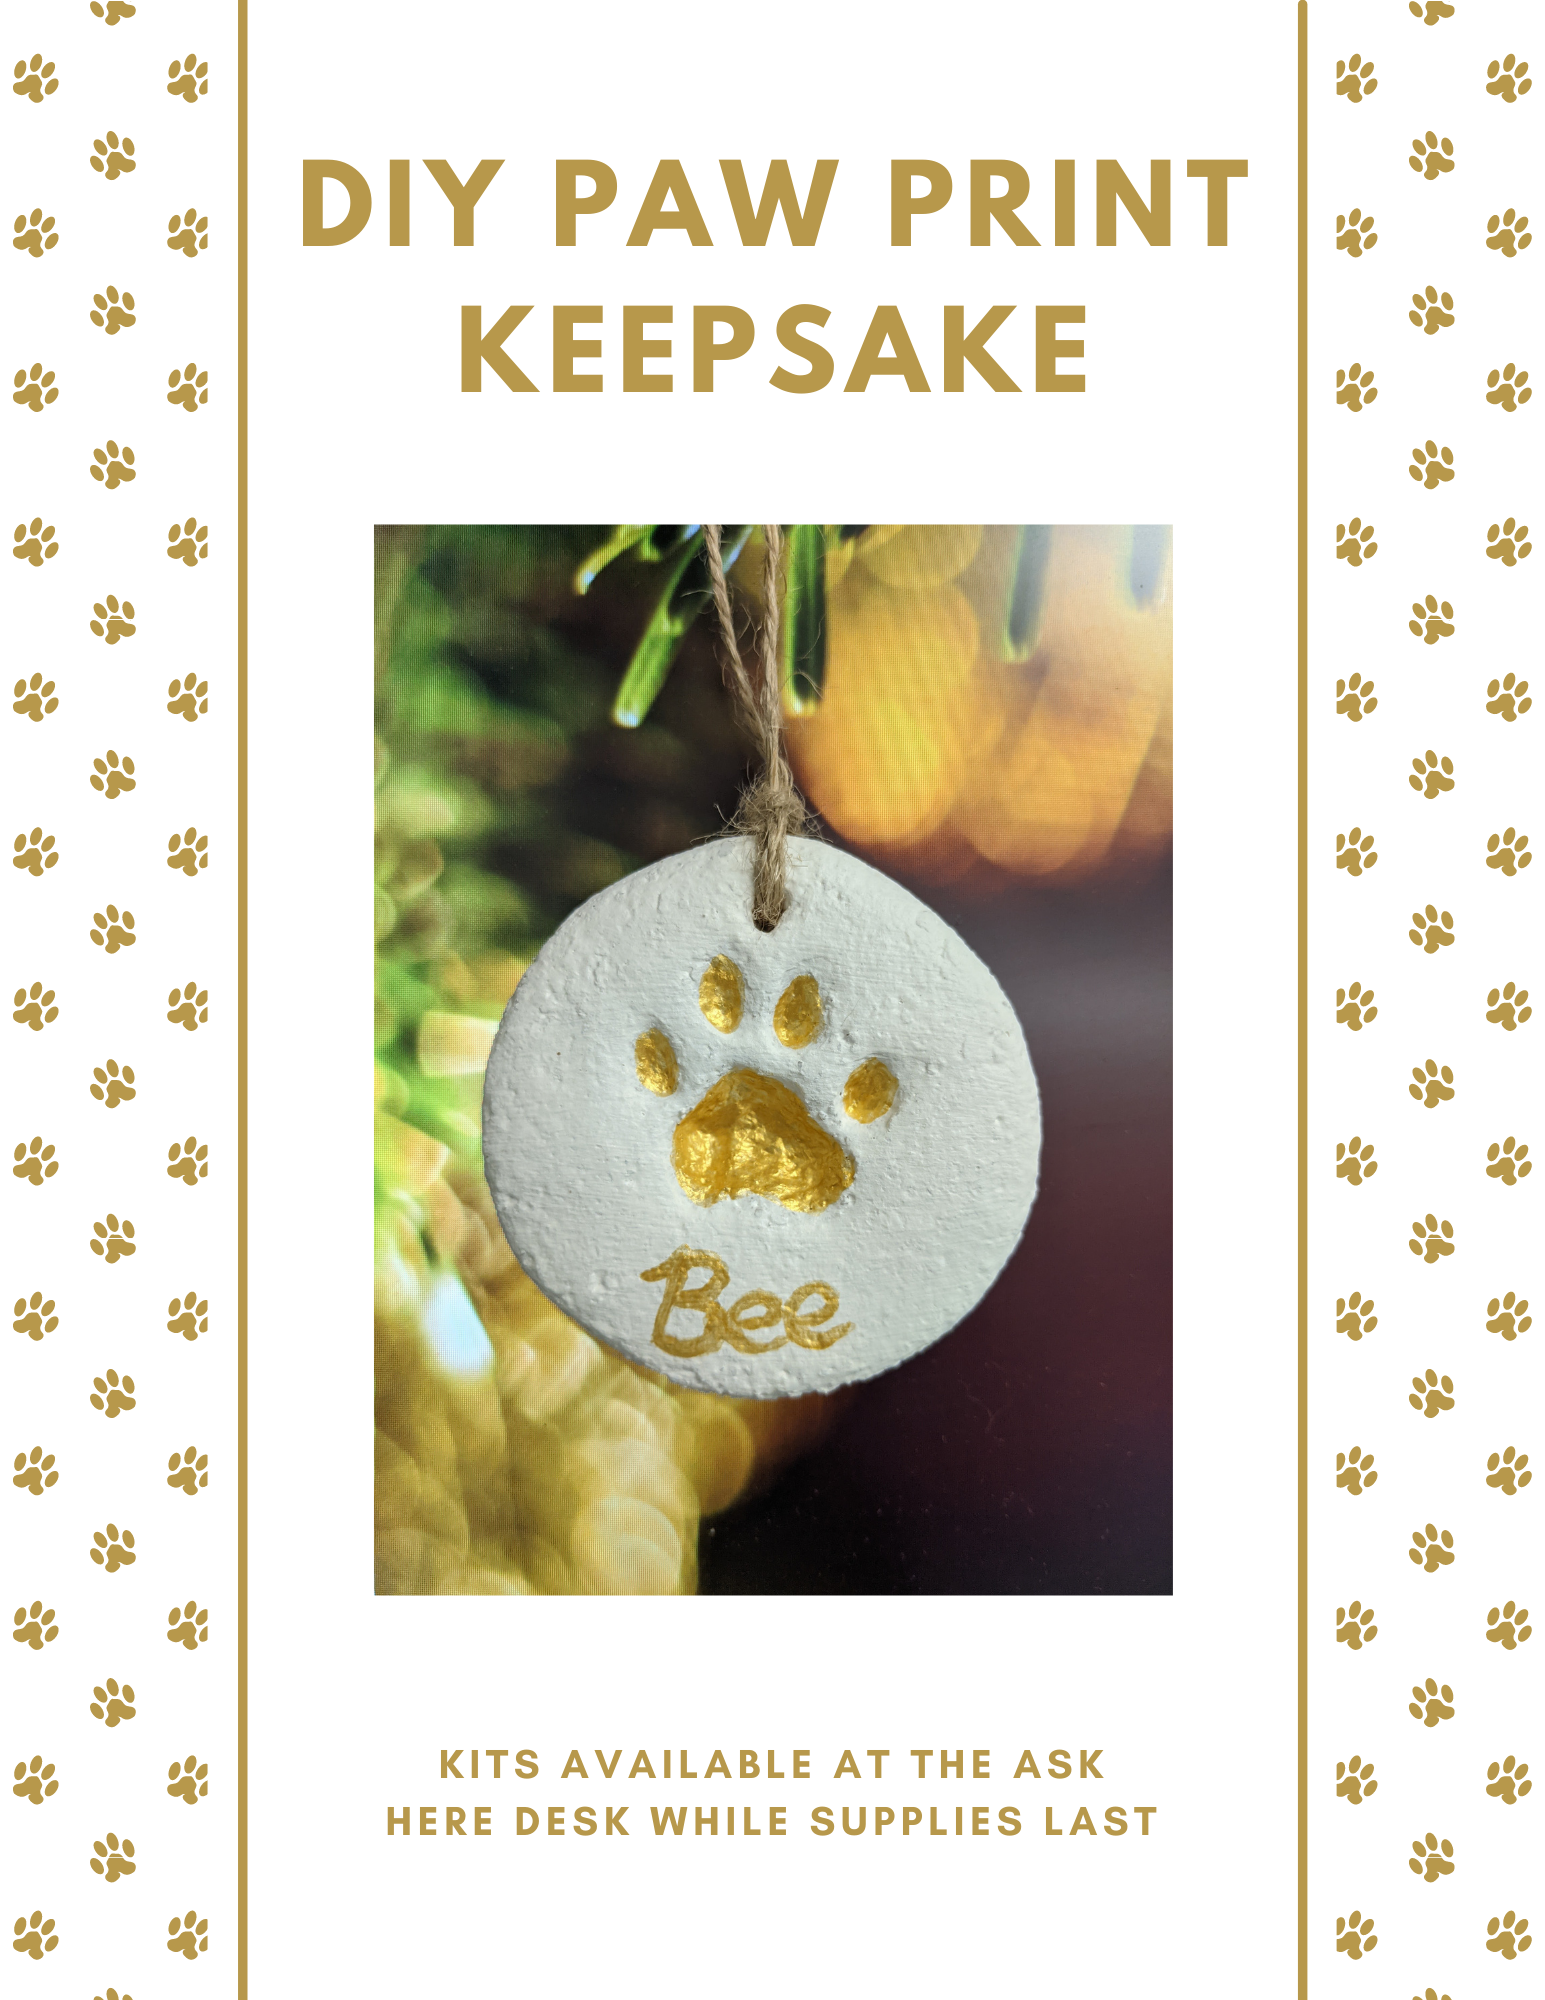 Gold text on a white background reads "DIY Paw Print Keepsake - Kits available at the Ask Here desk while supplies last". The sides feature a border of gold paw prints. In the center of the image, there is a photo of a paw print ornament hanging from a Christmas tree. The ornament is circular and white, and the paw print in the center is painted gold. Gold writing at the bottom of the ornament spells out the pet's name as "Bee".